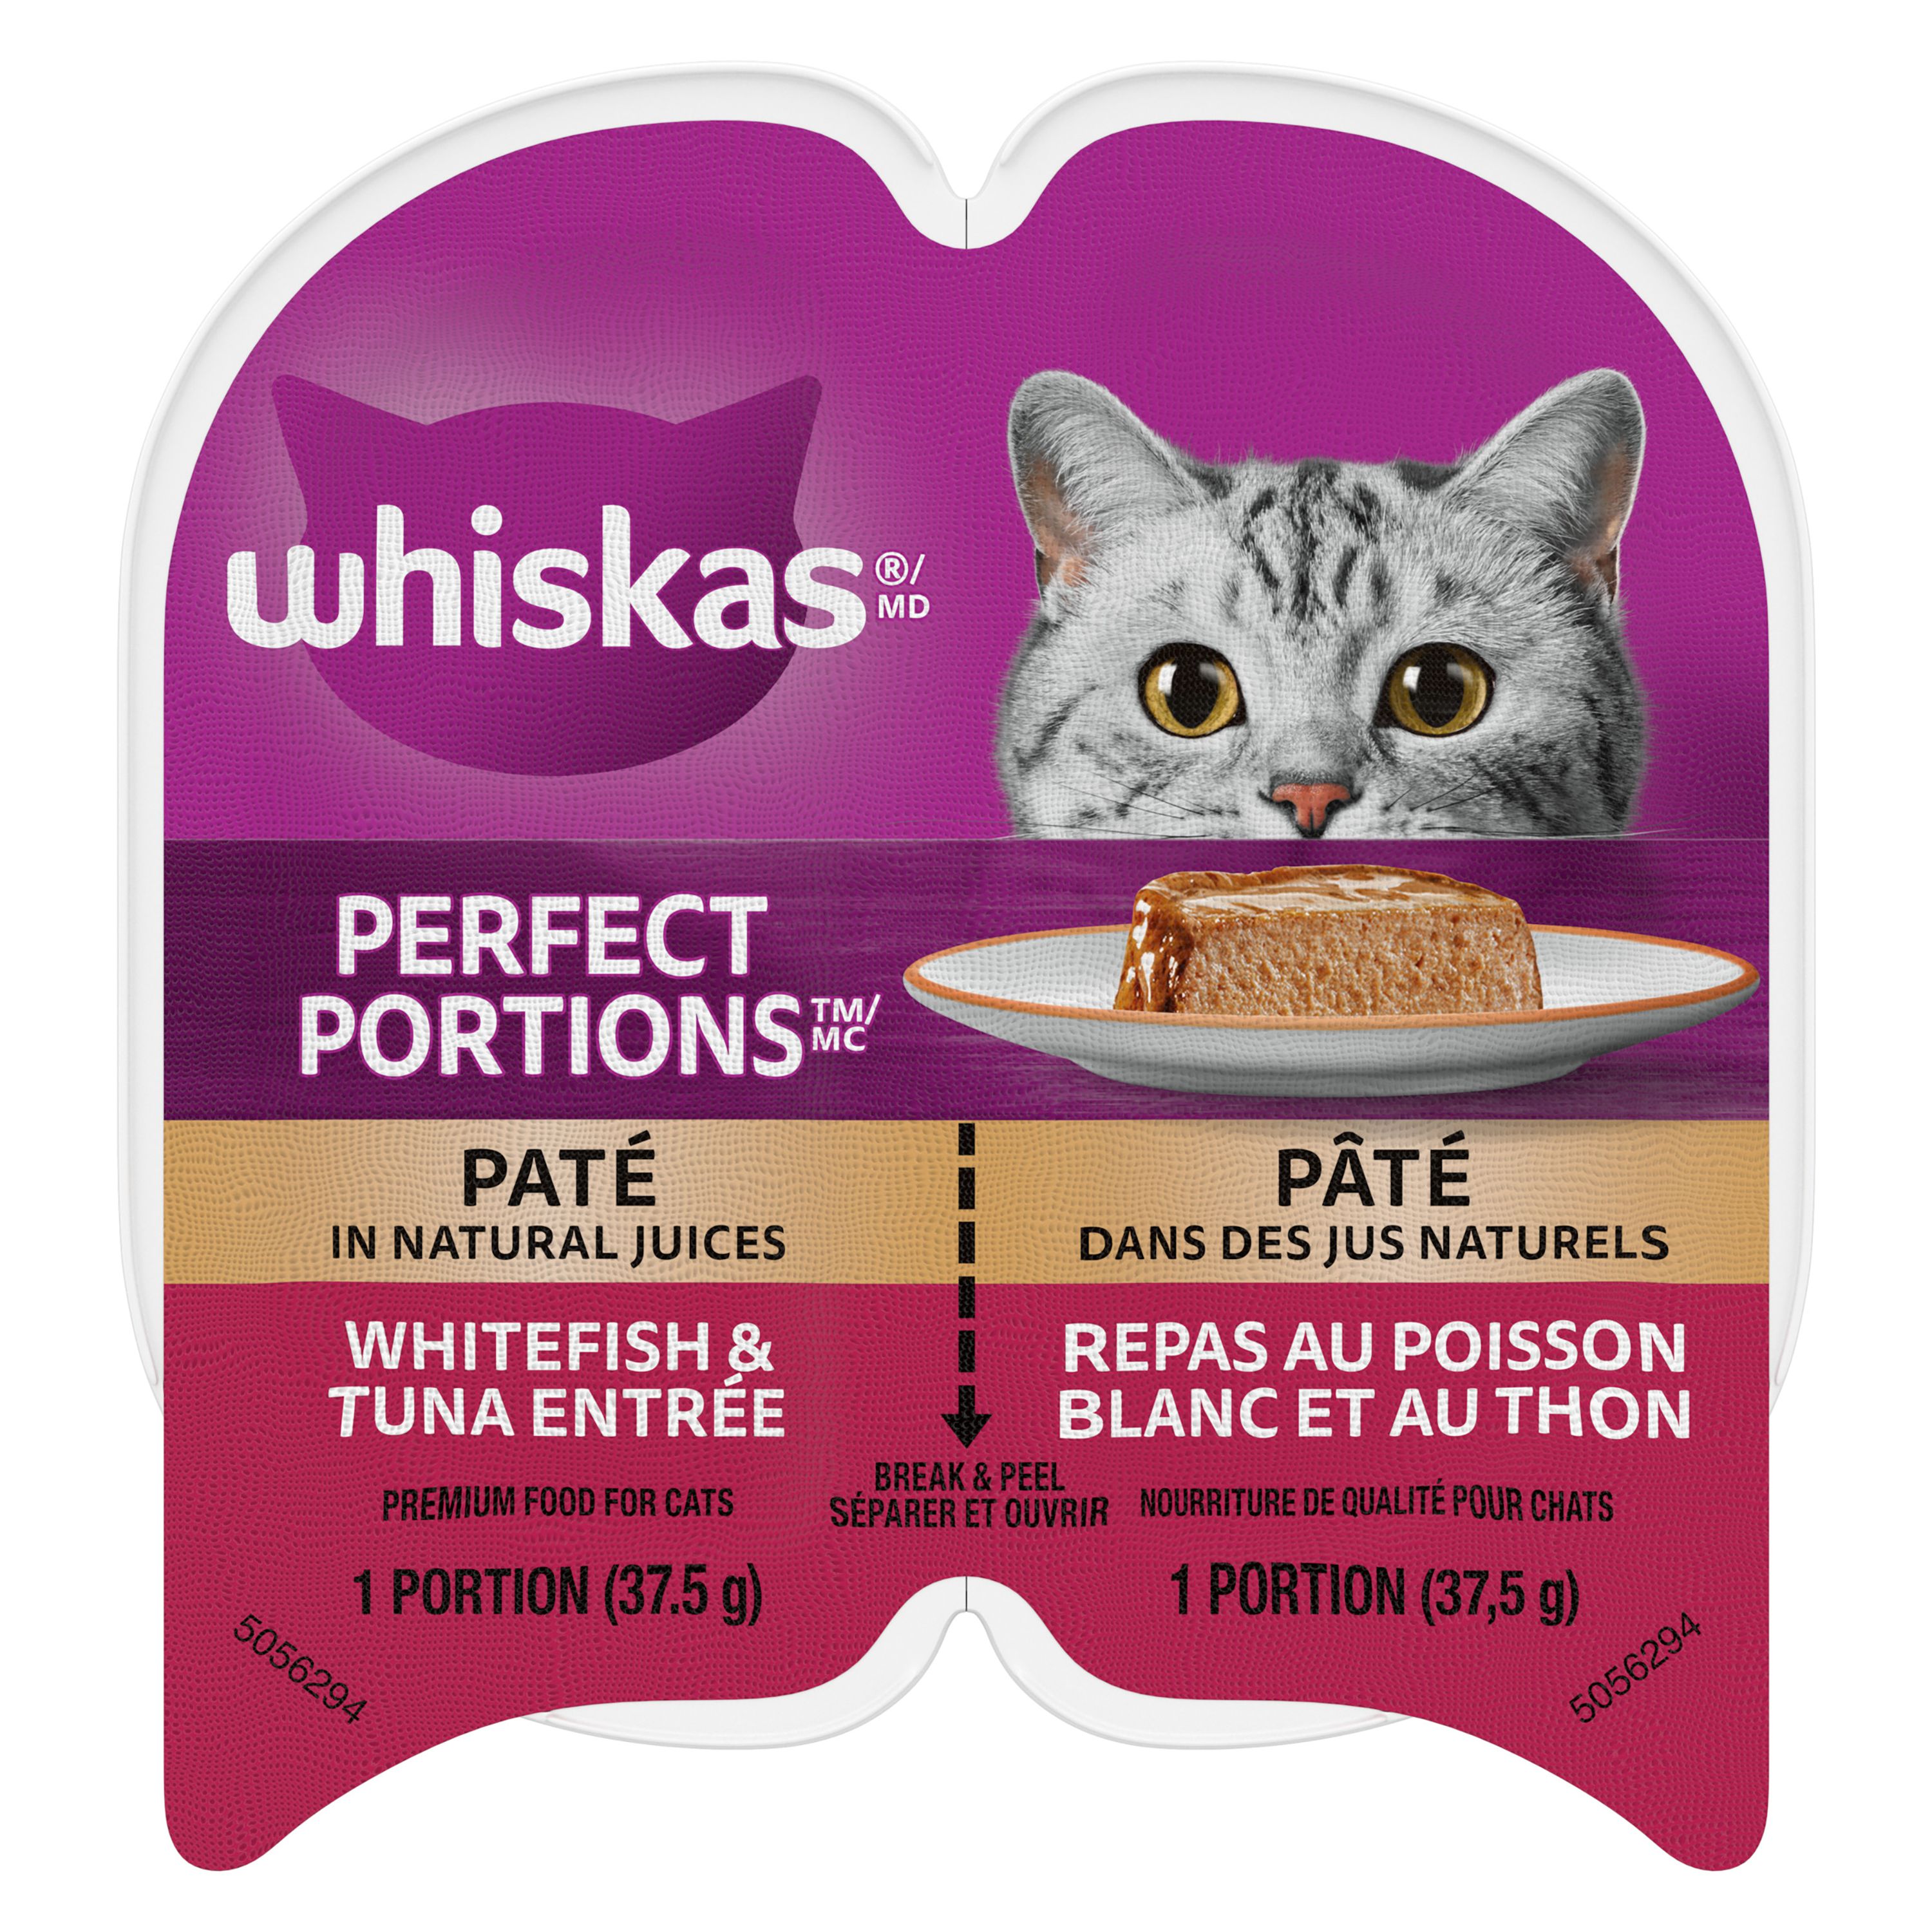 whiskas perfect portions